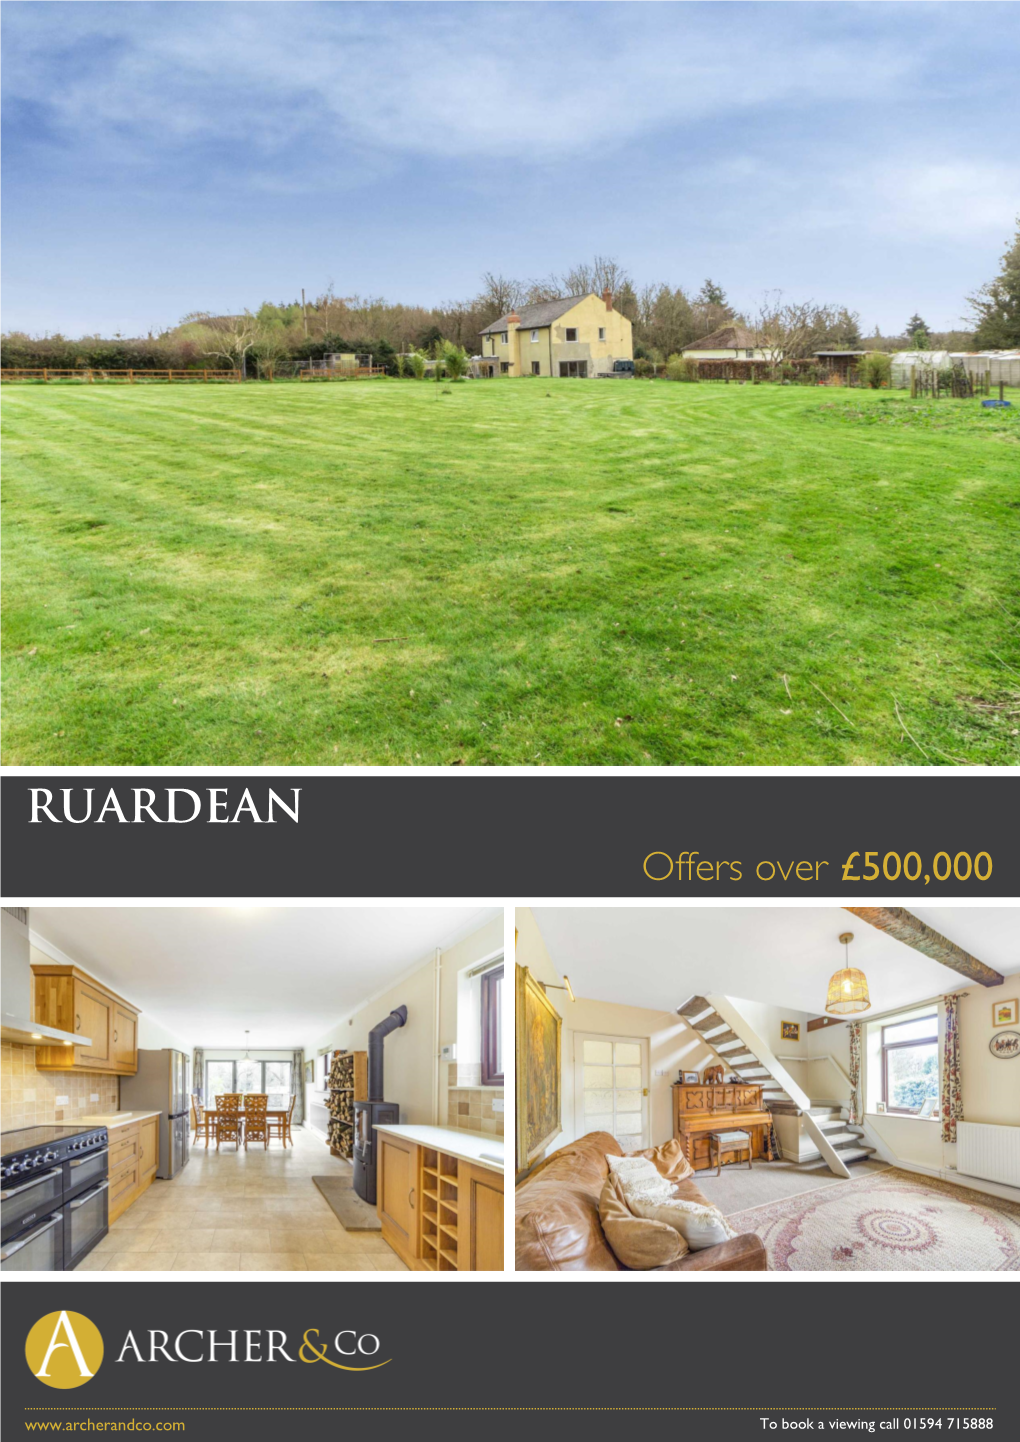 RUARDEAN Offers Over £500,000